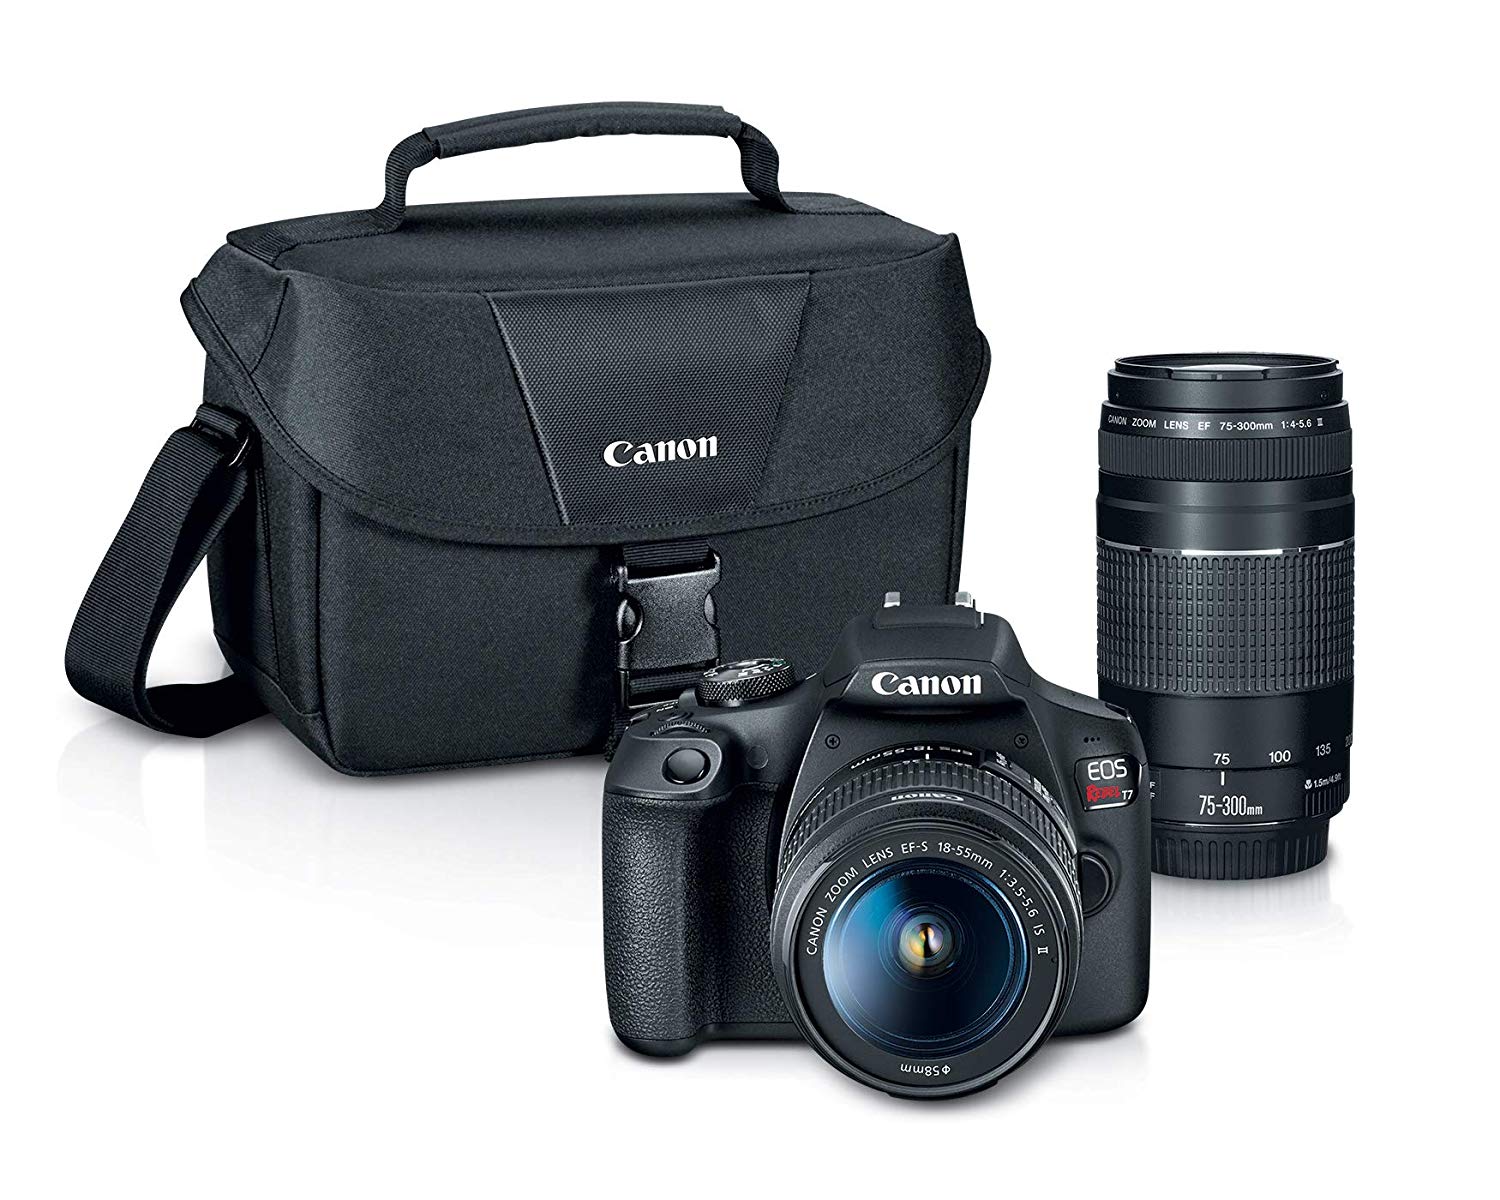 Canon USA Canon EOS Rebel T7 24.1MP DSLR Camera with EF-S 18-55mm f/3.5-5.6 IS II Lens and EF 75-300mm f/4-5.6 III Lens